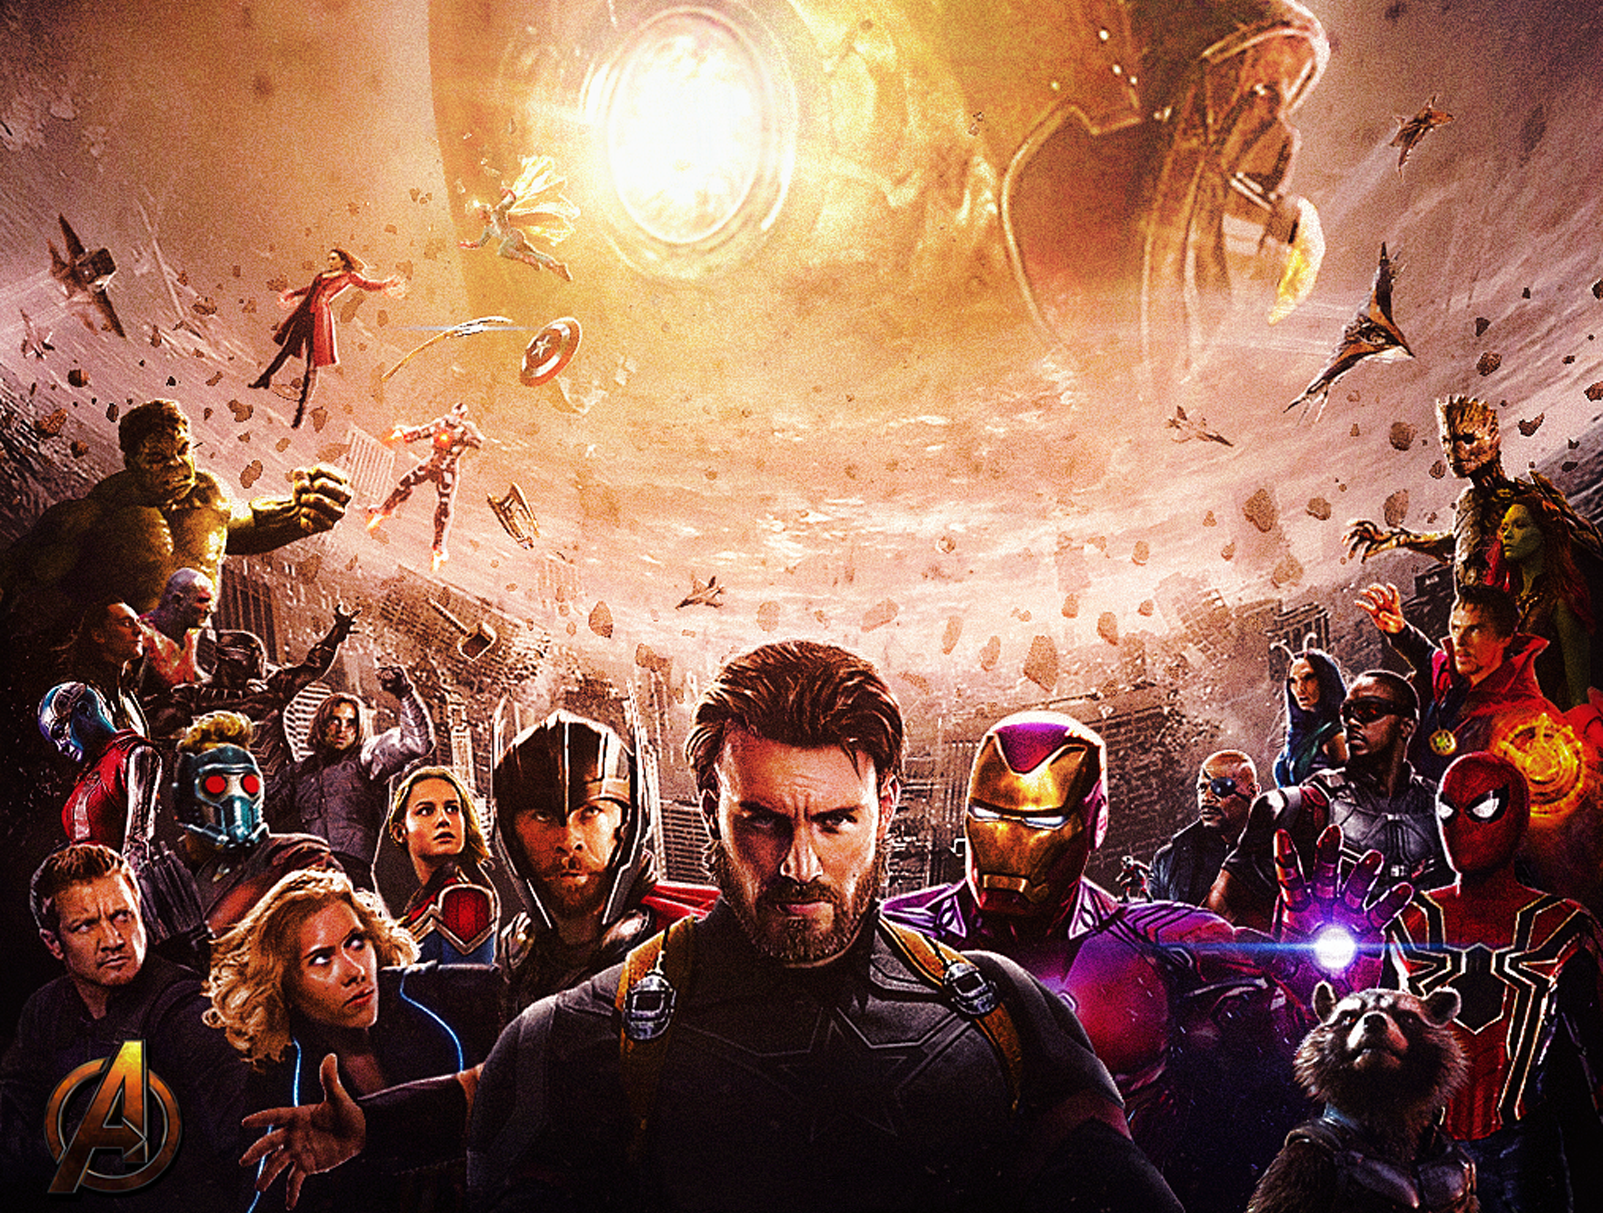 Avengers Infinity War Wallpaper And Background Image